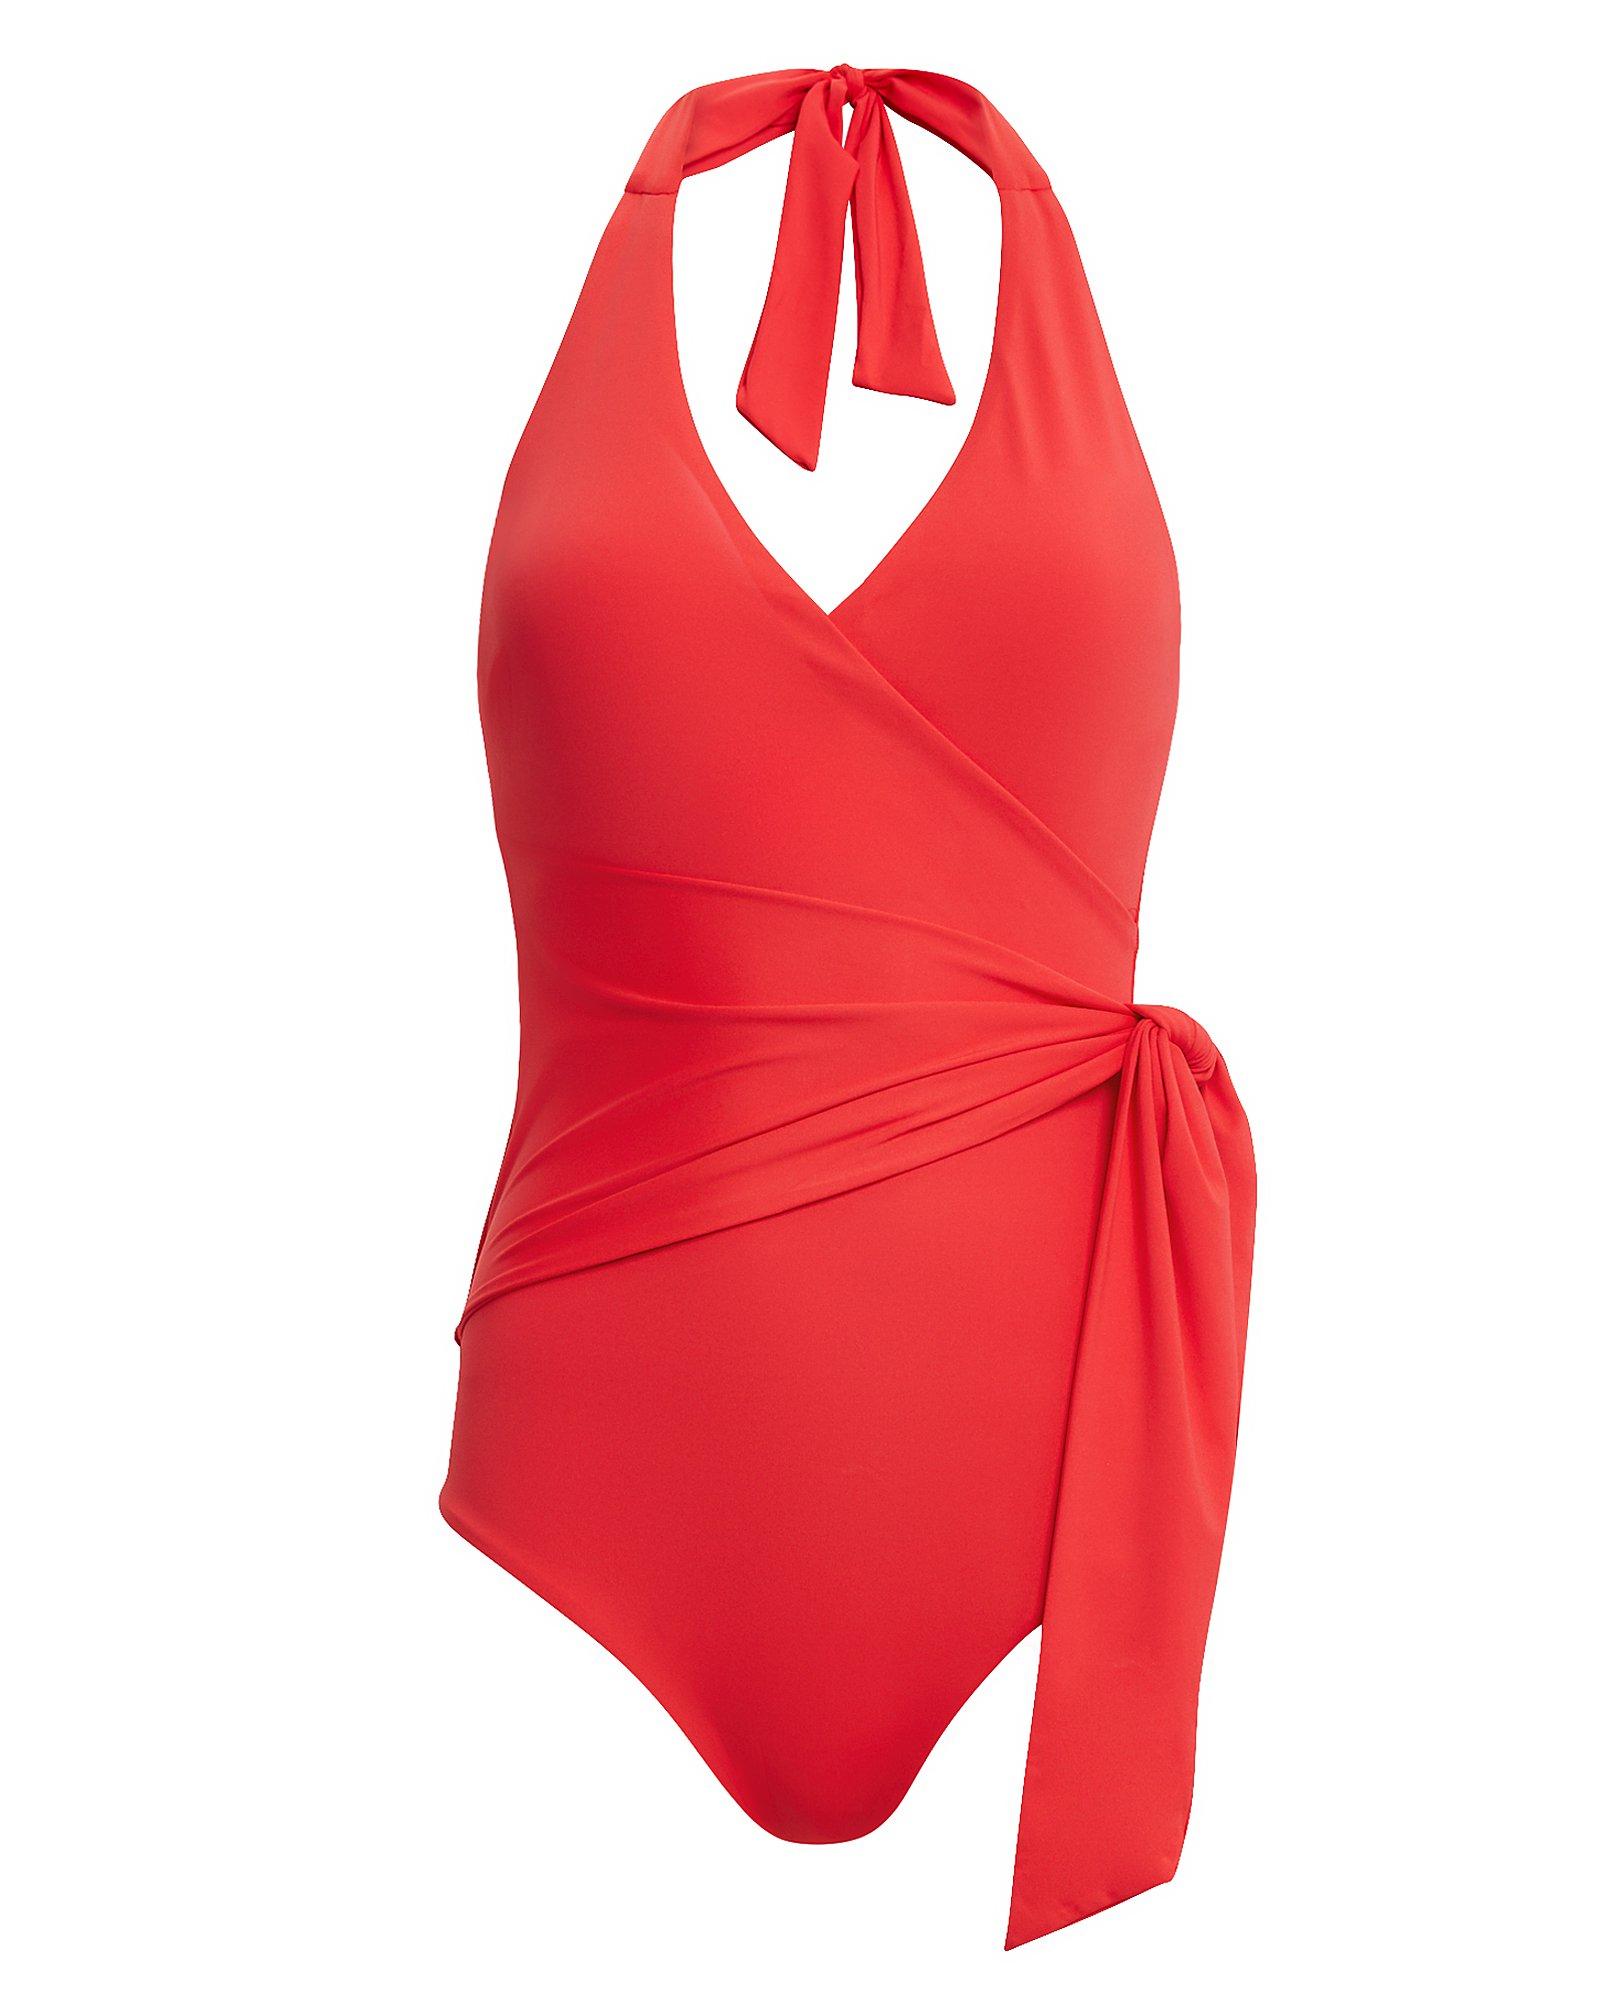 Lyst - Onia Elena One Piece Swimsuit in Red